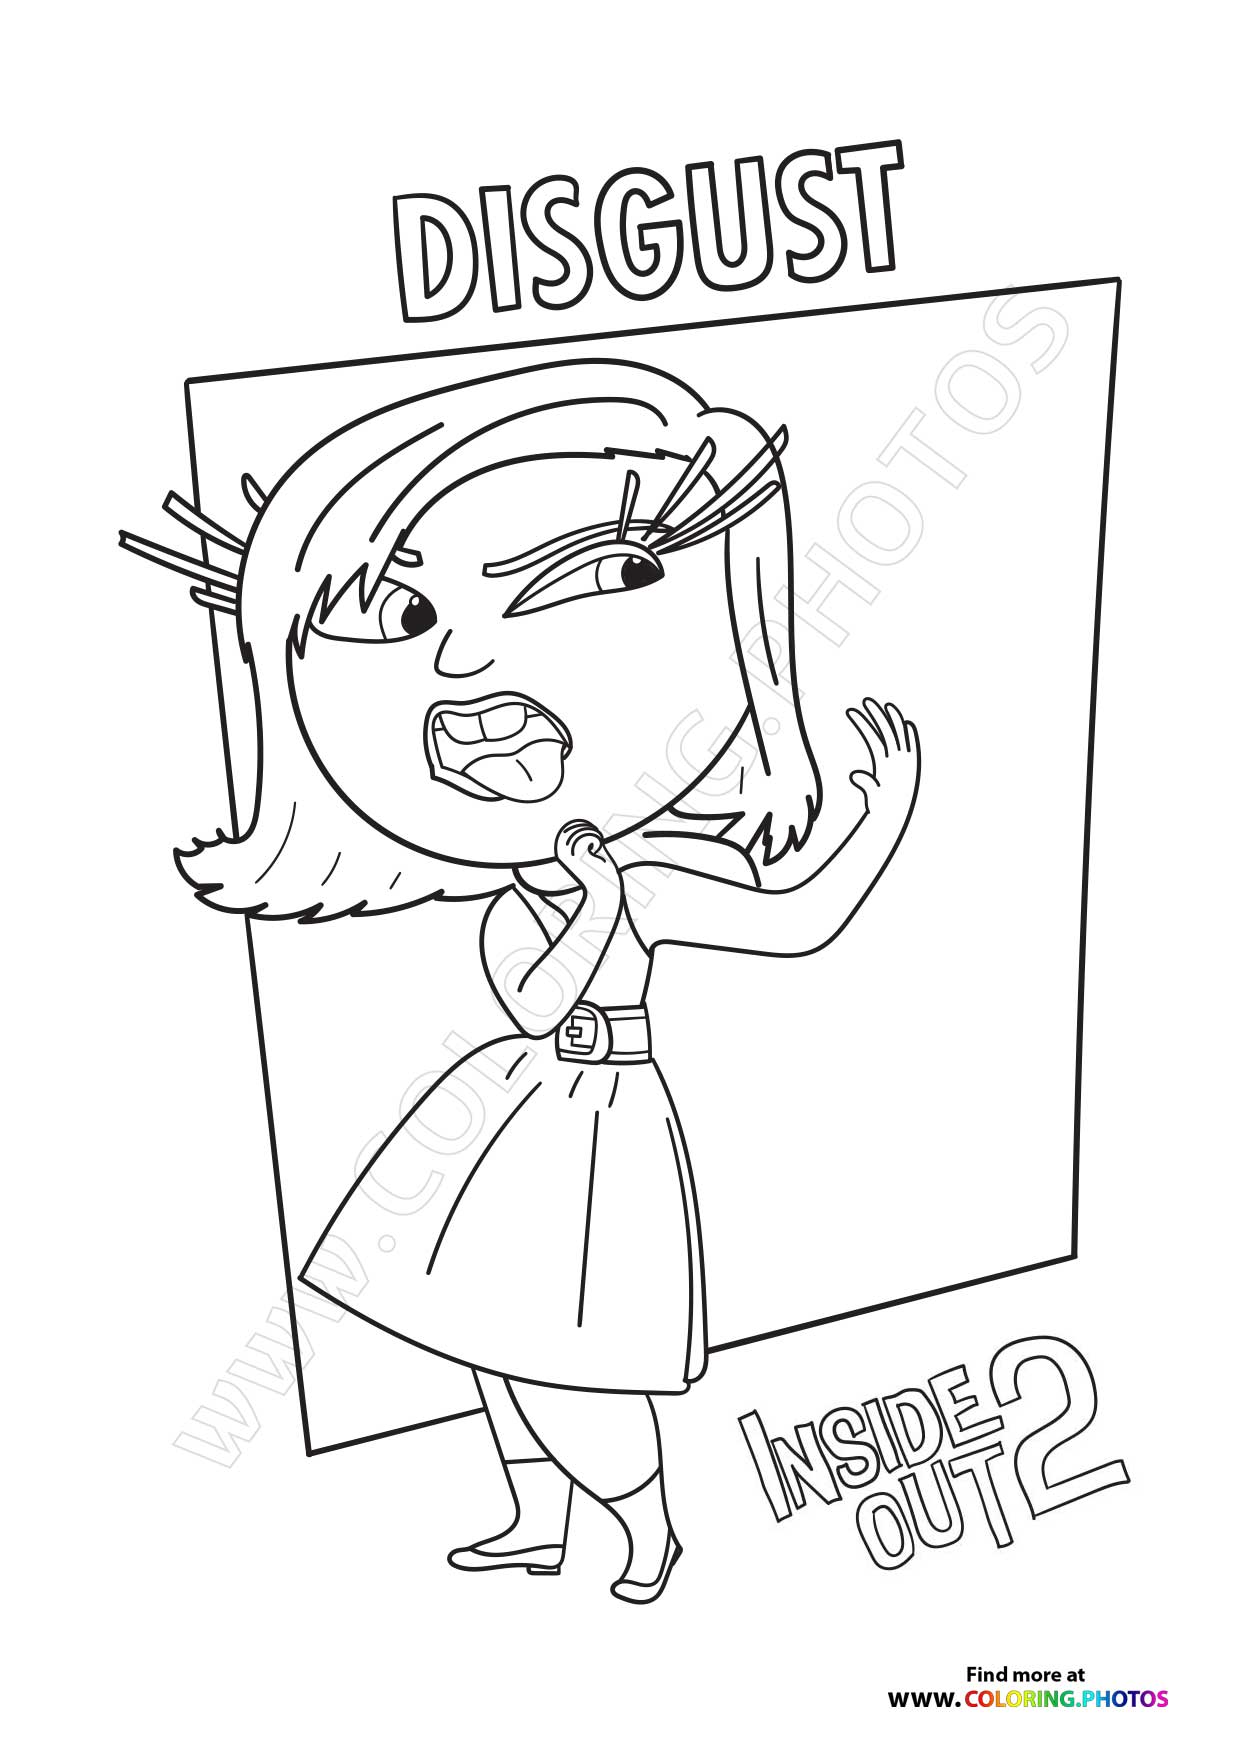 Disgust Inside Out 2 - Coloring Pages ...